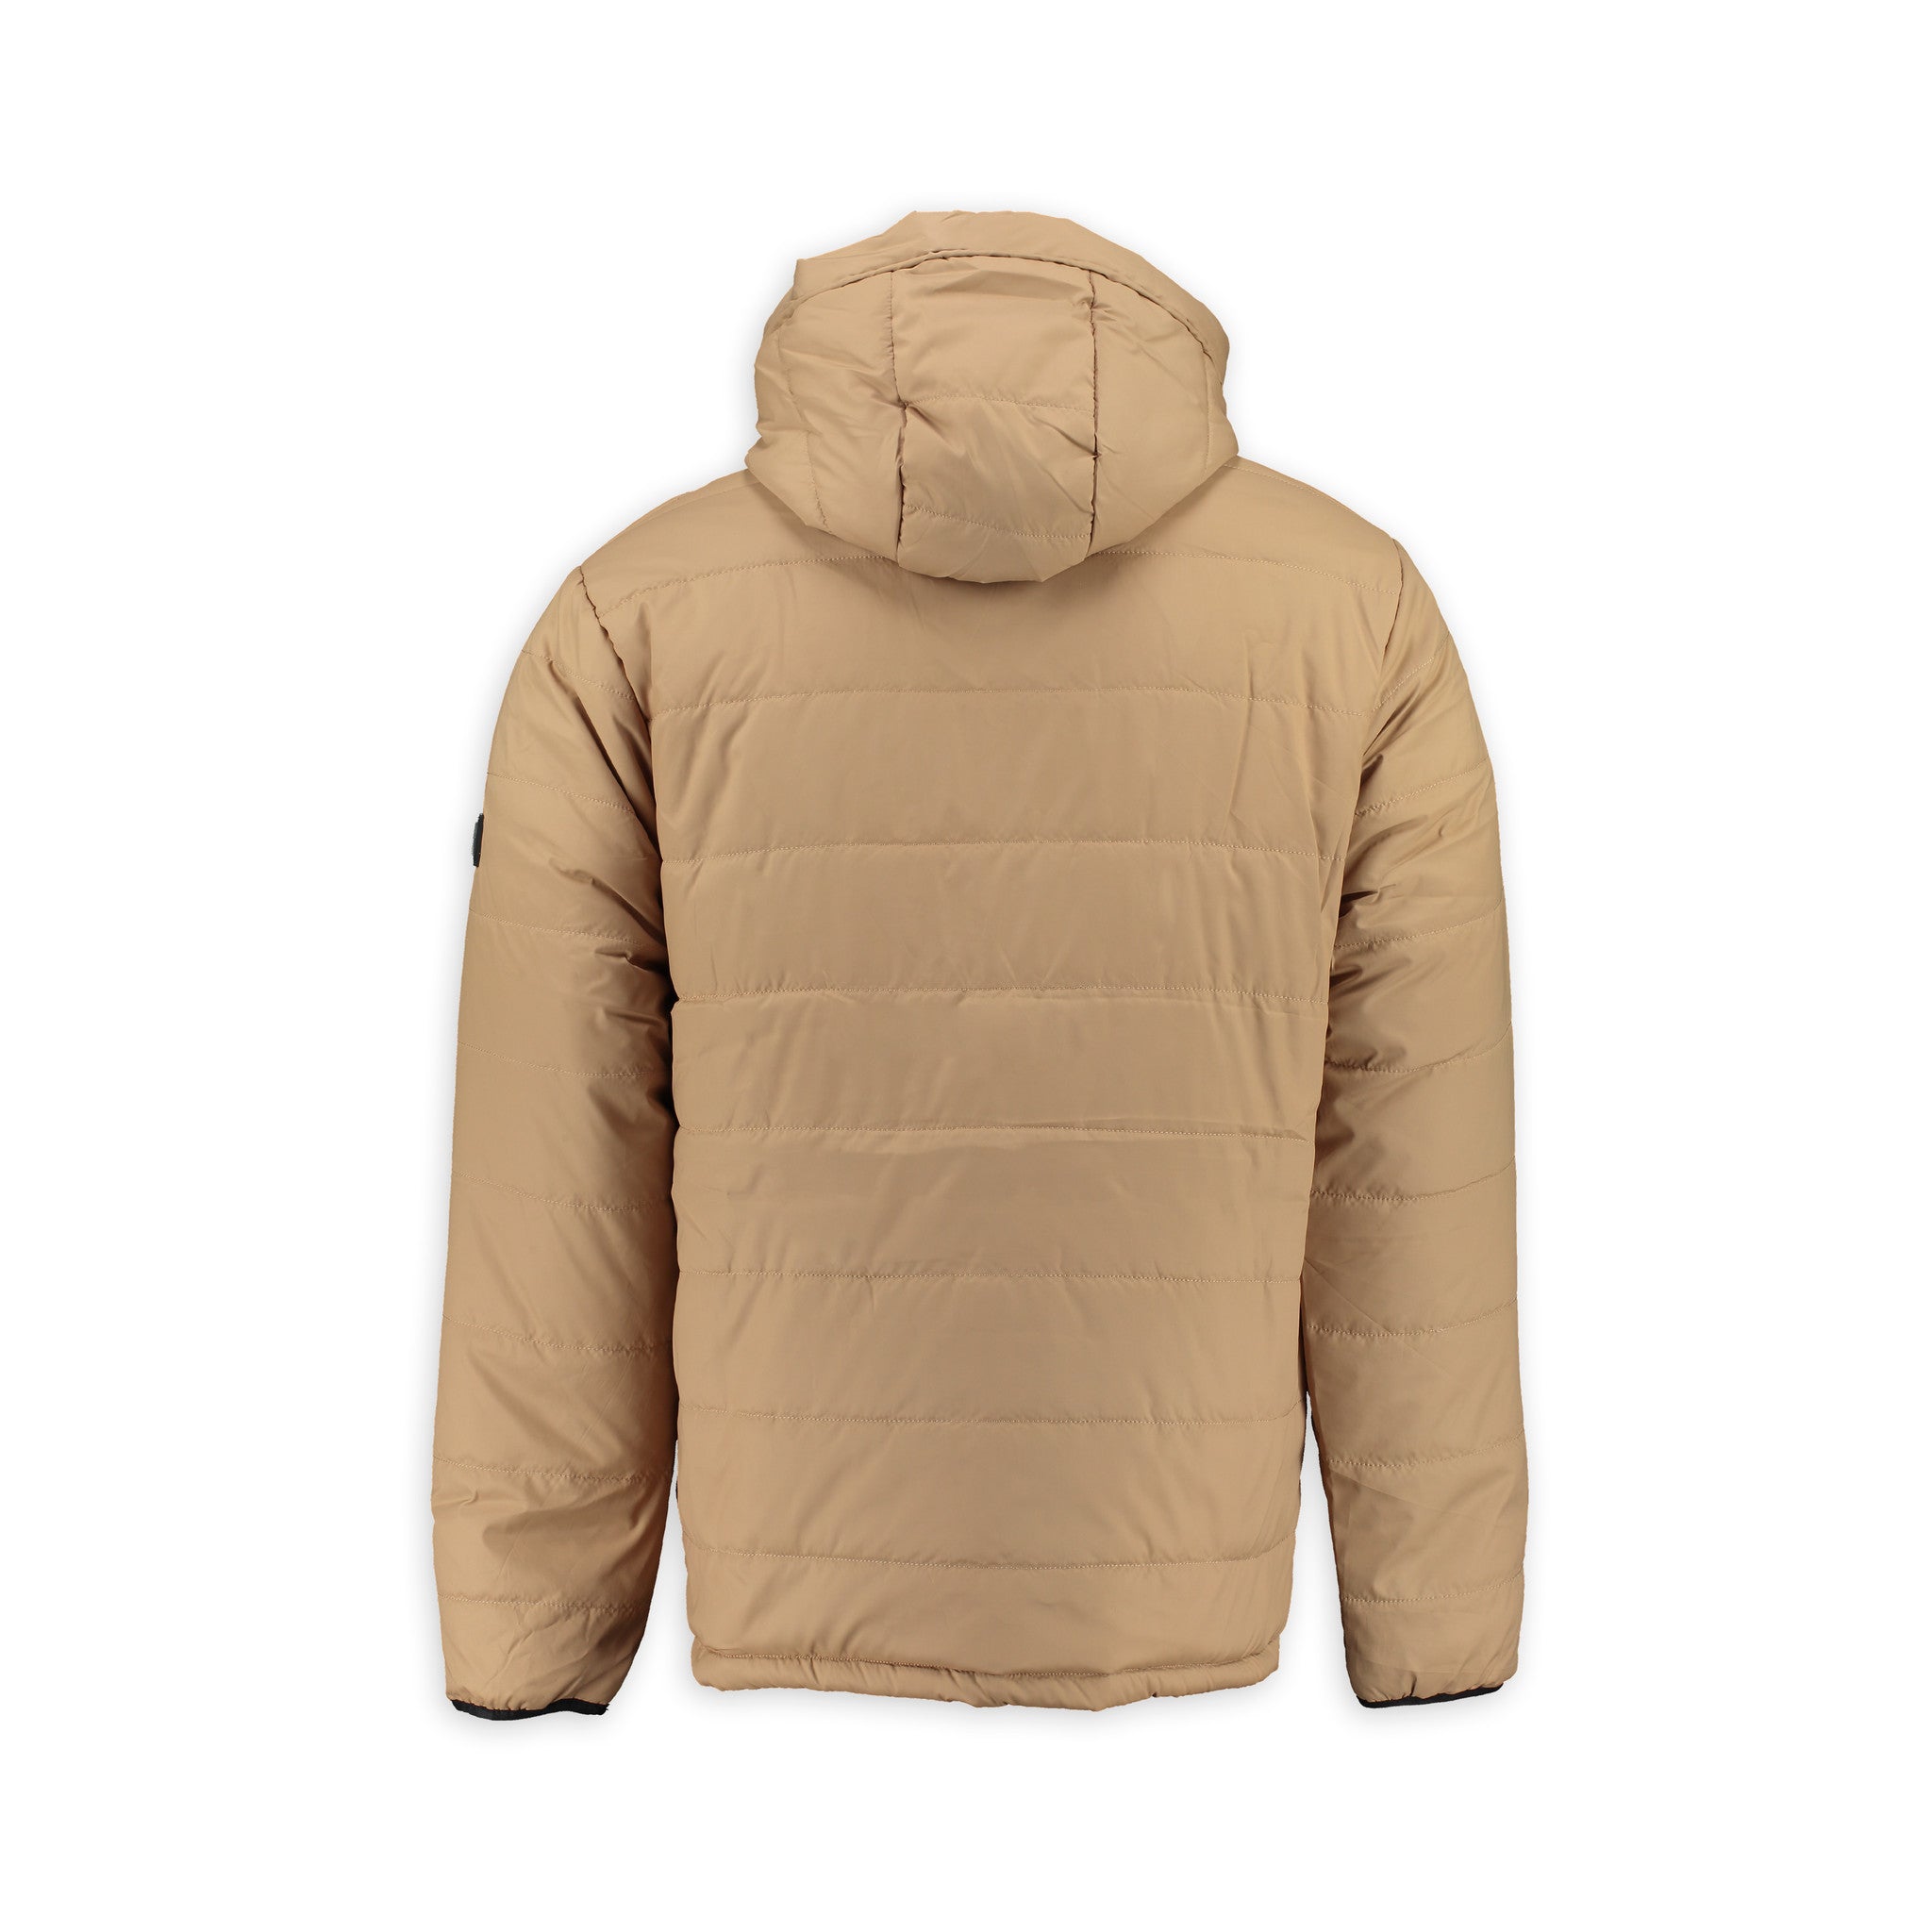 Aspact Expedition Jacket Beige